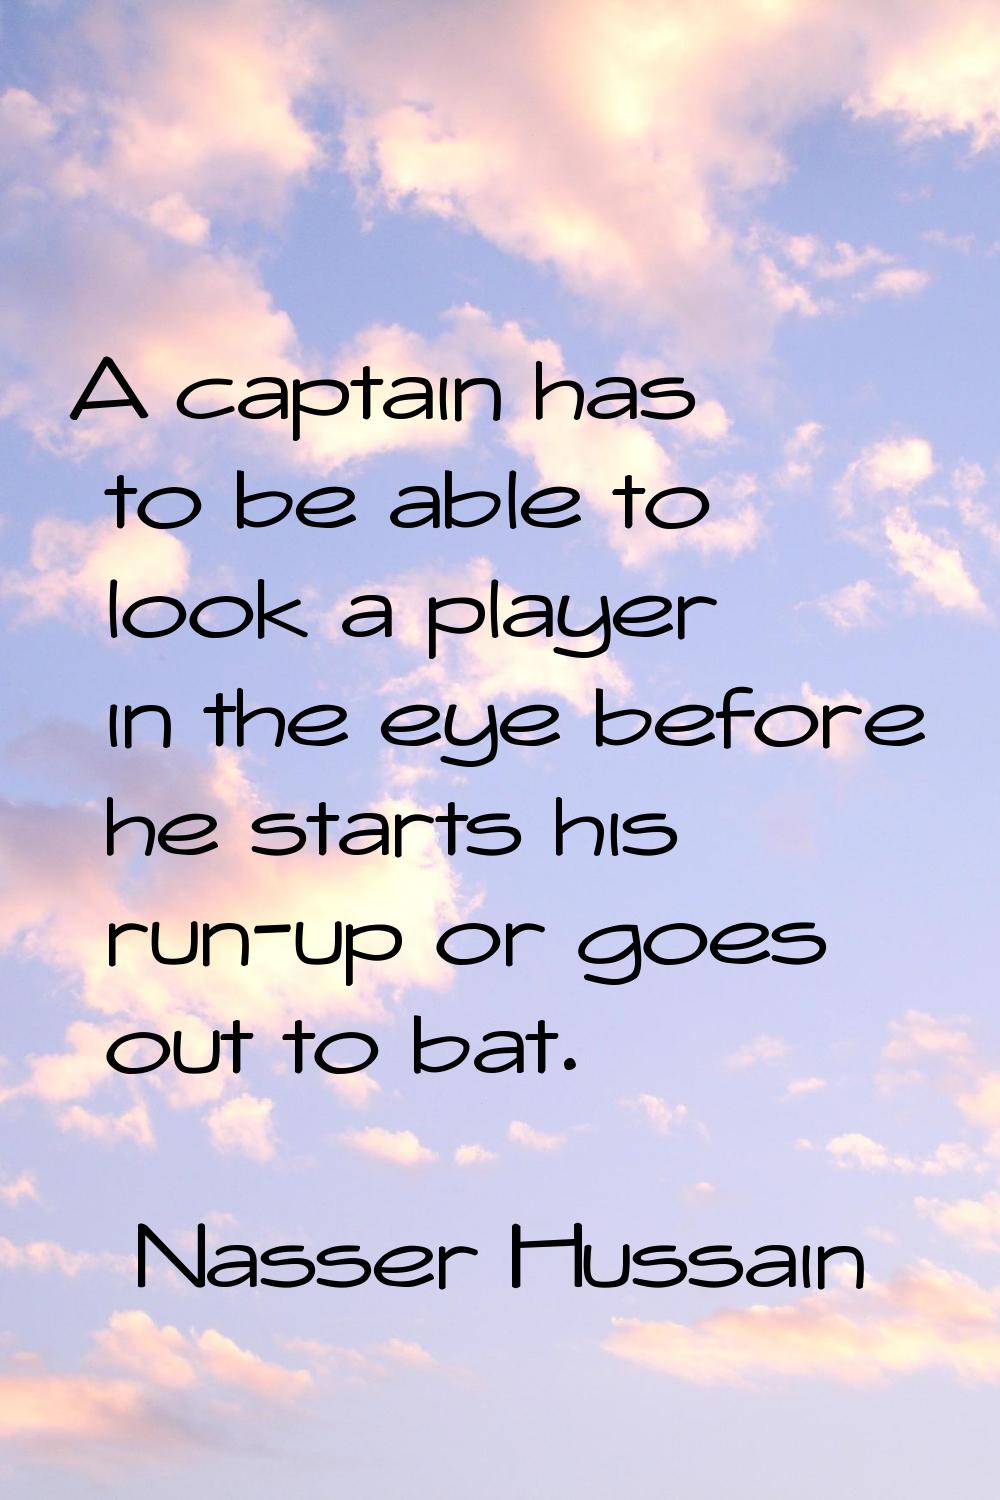 A captain has to be able to look a player in the eye before he starts his run-up or goes out to bat